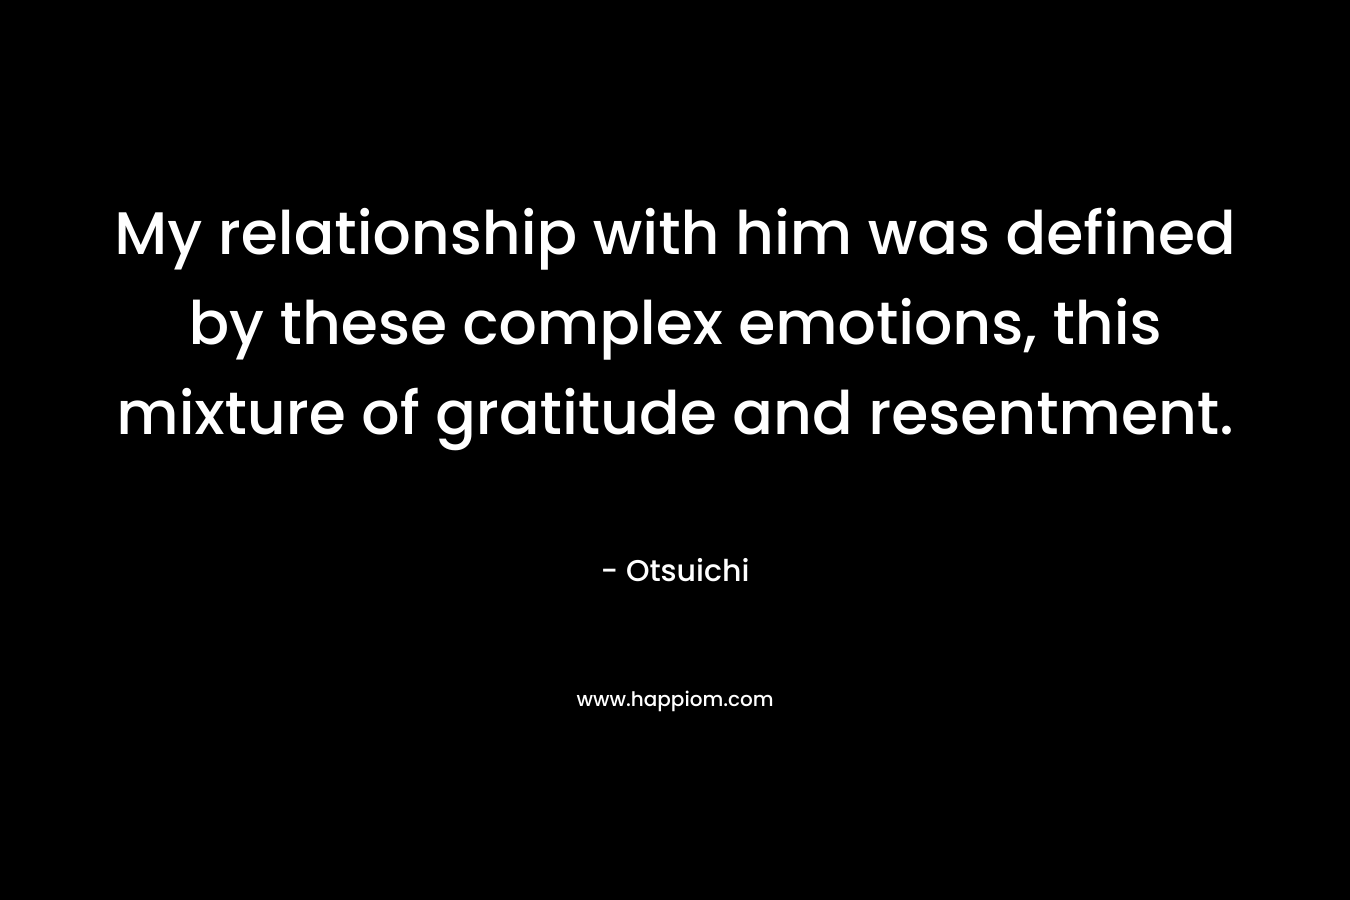 My relationship with him was defined by these complex emotions, this mixture of gratitude and resentment. – Otsuichi